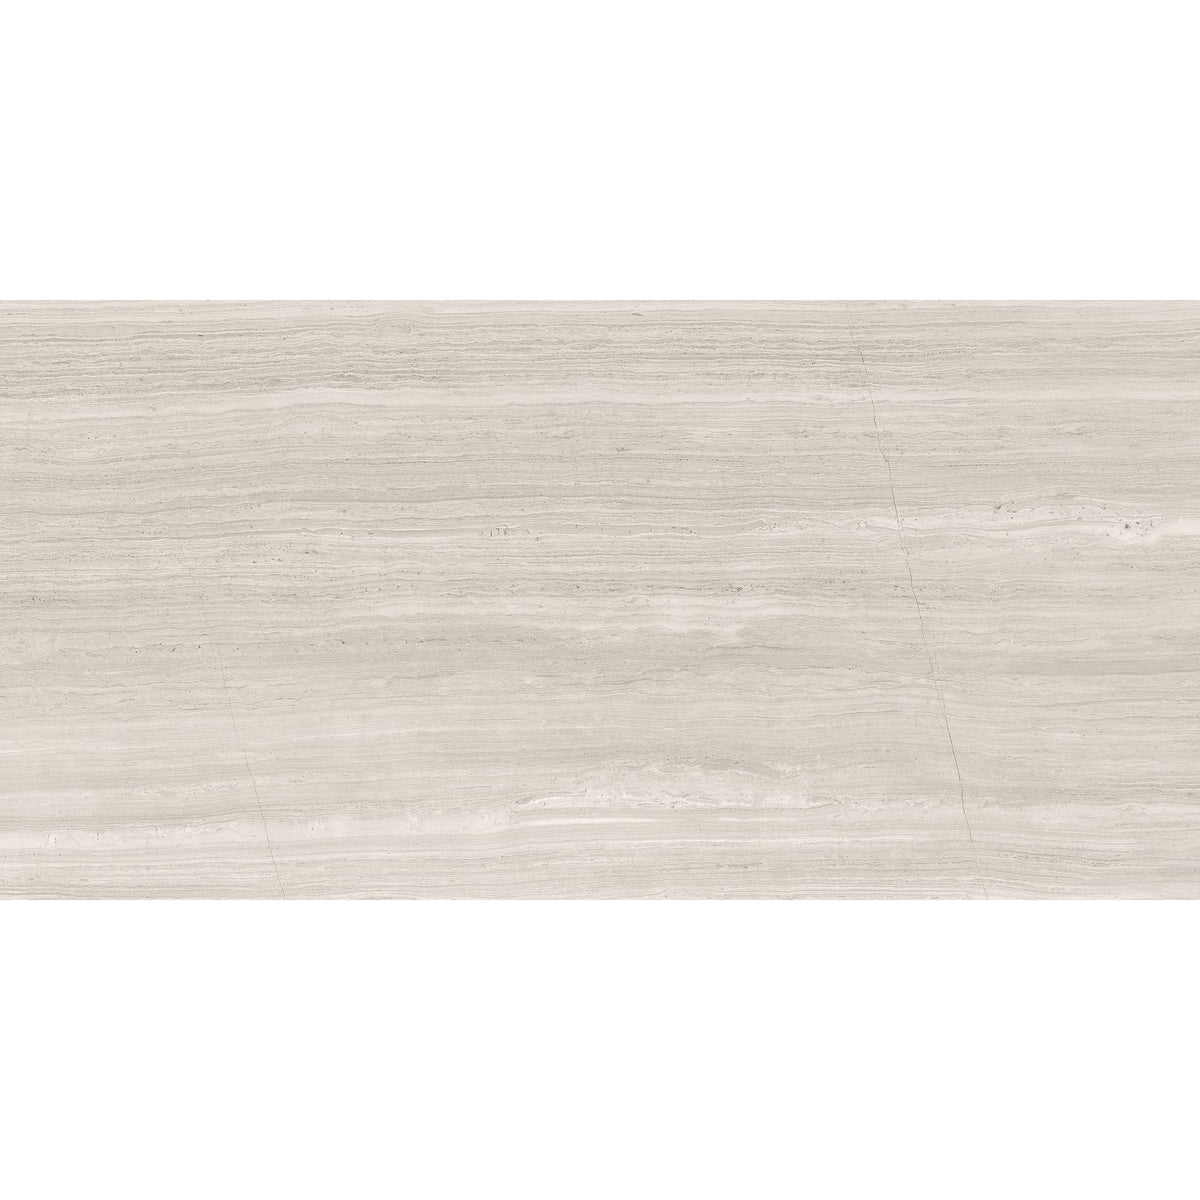 Anatolia Mayfair 16 in. x 32 in. HD Rectified Porcelain Tile - Strada Ash (Polished)